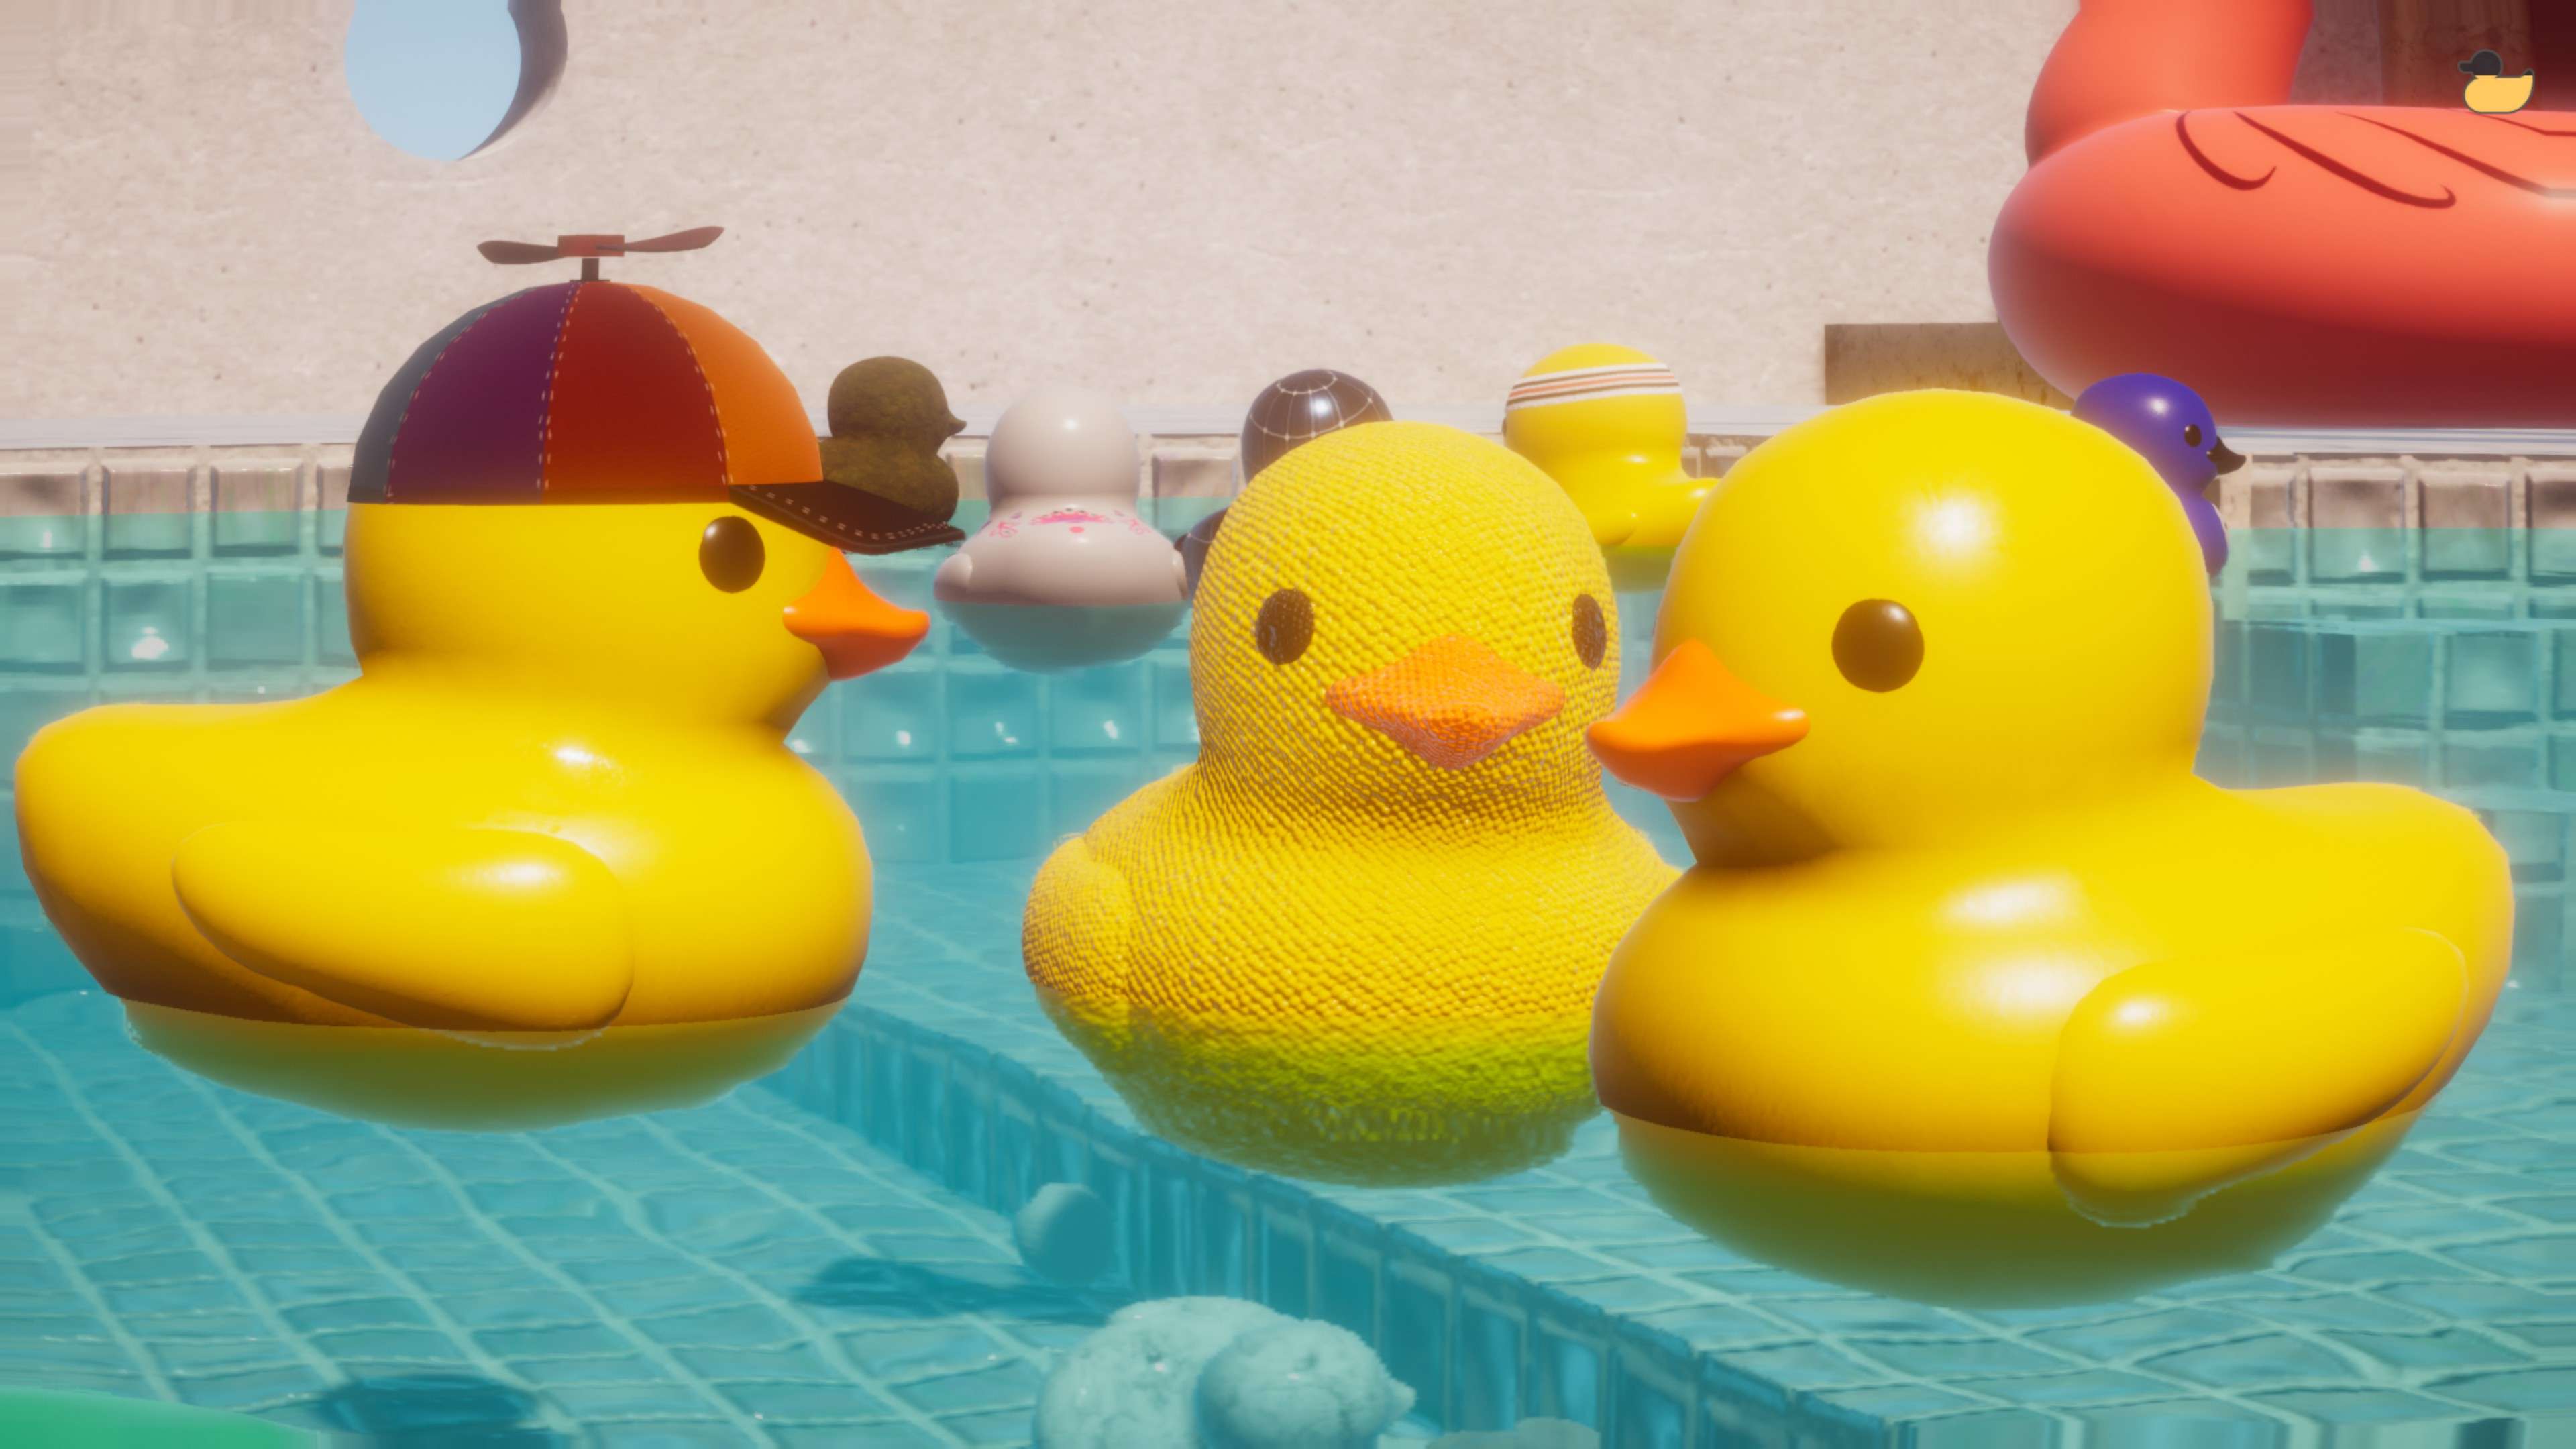 Placid Plastic Duck Simulator A Brief Guide To The Chameleon Duck DLC 